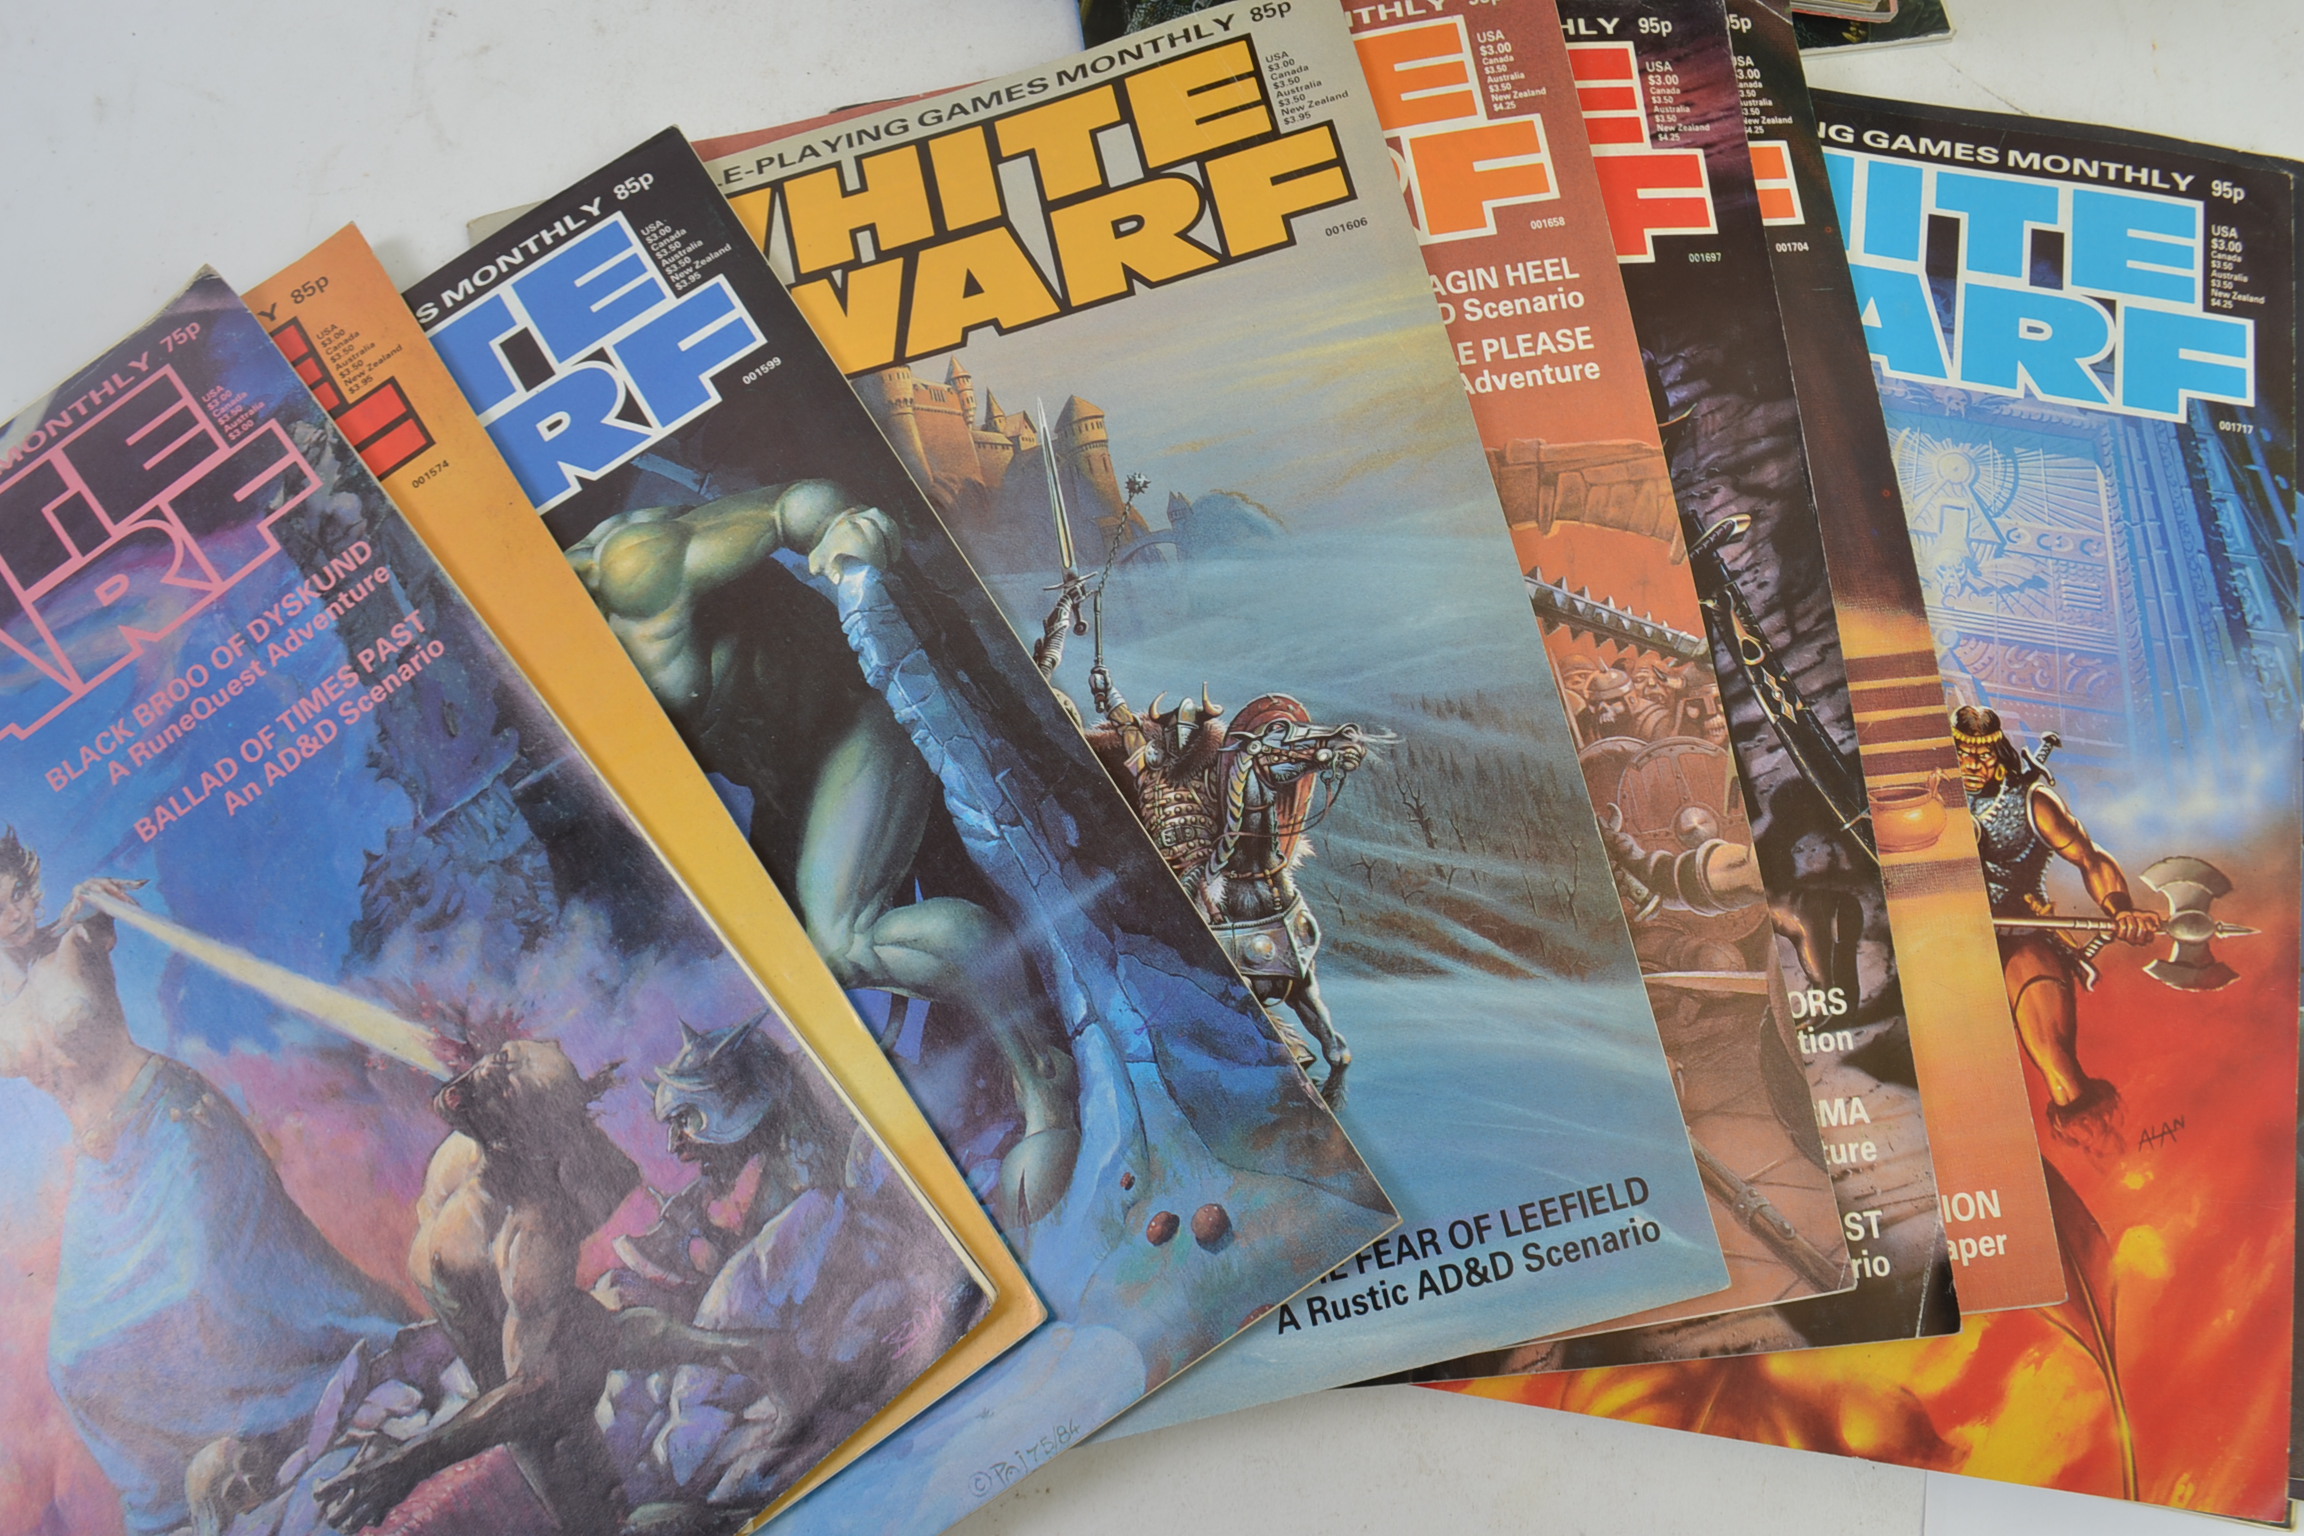 WHITE DWARF; A collection of 40+ vintage White Dwarf Role Playing Games magazines. - Image 2 of 2